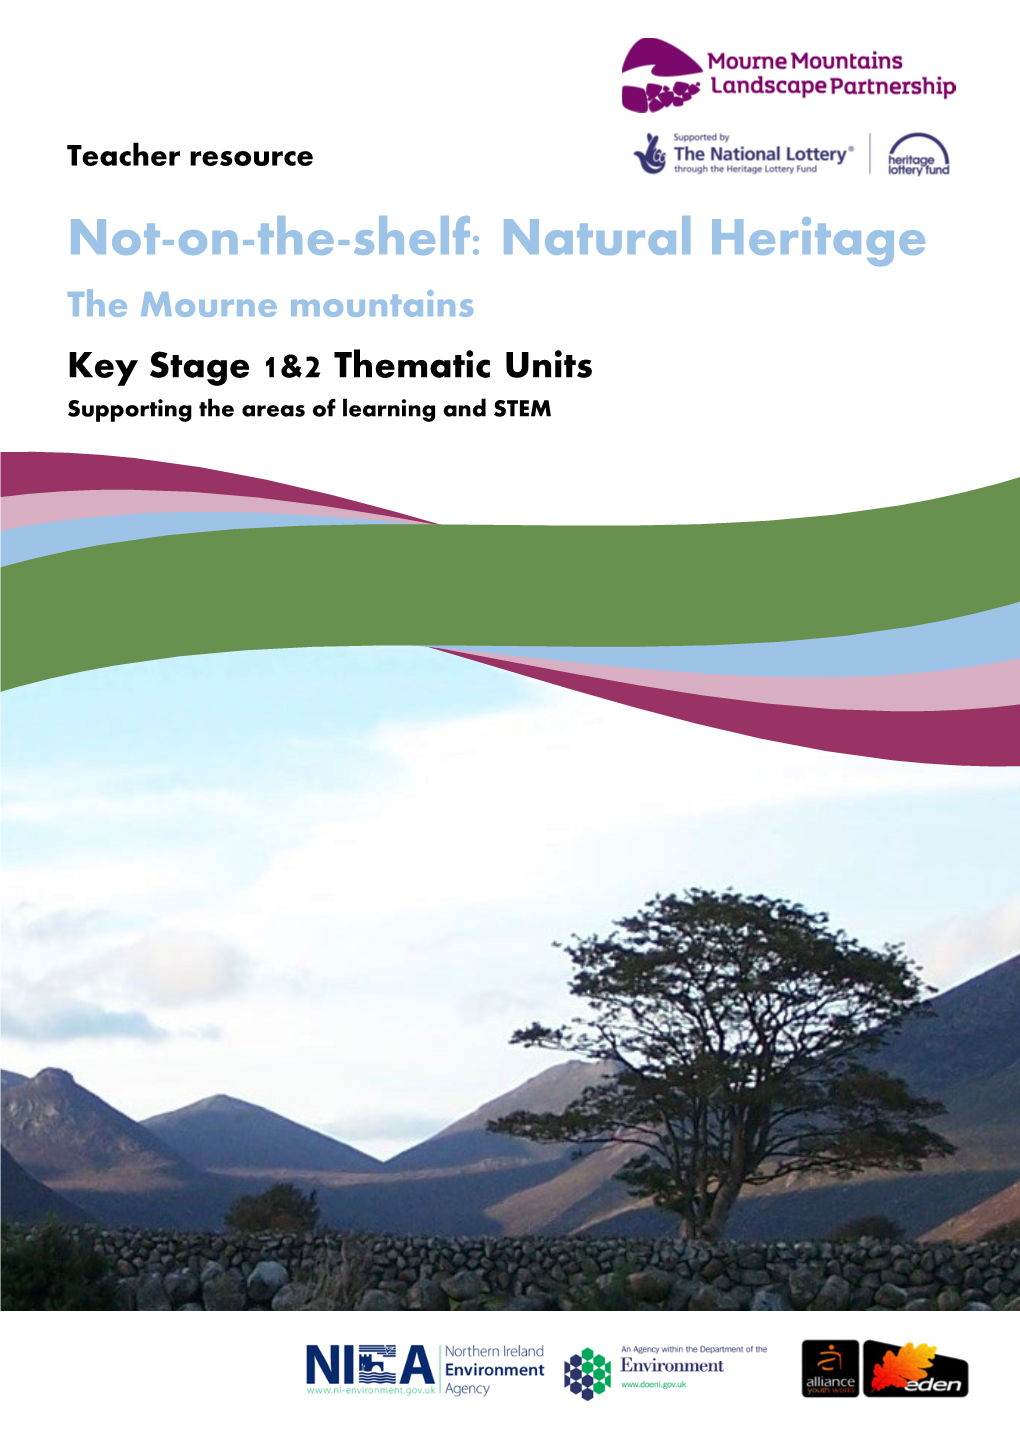 Natural Heritage the Mourne Mountains Key Stage 1&2 Thematic Units Supporting the Areas of Learning and STEM